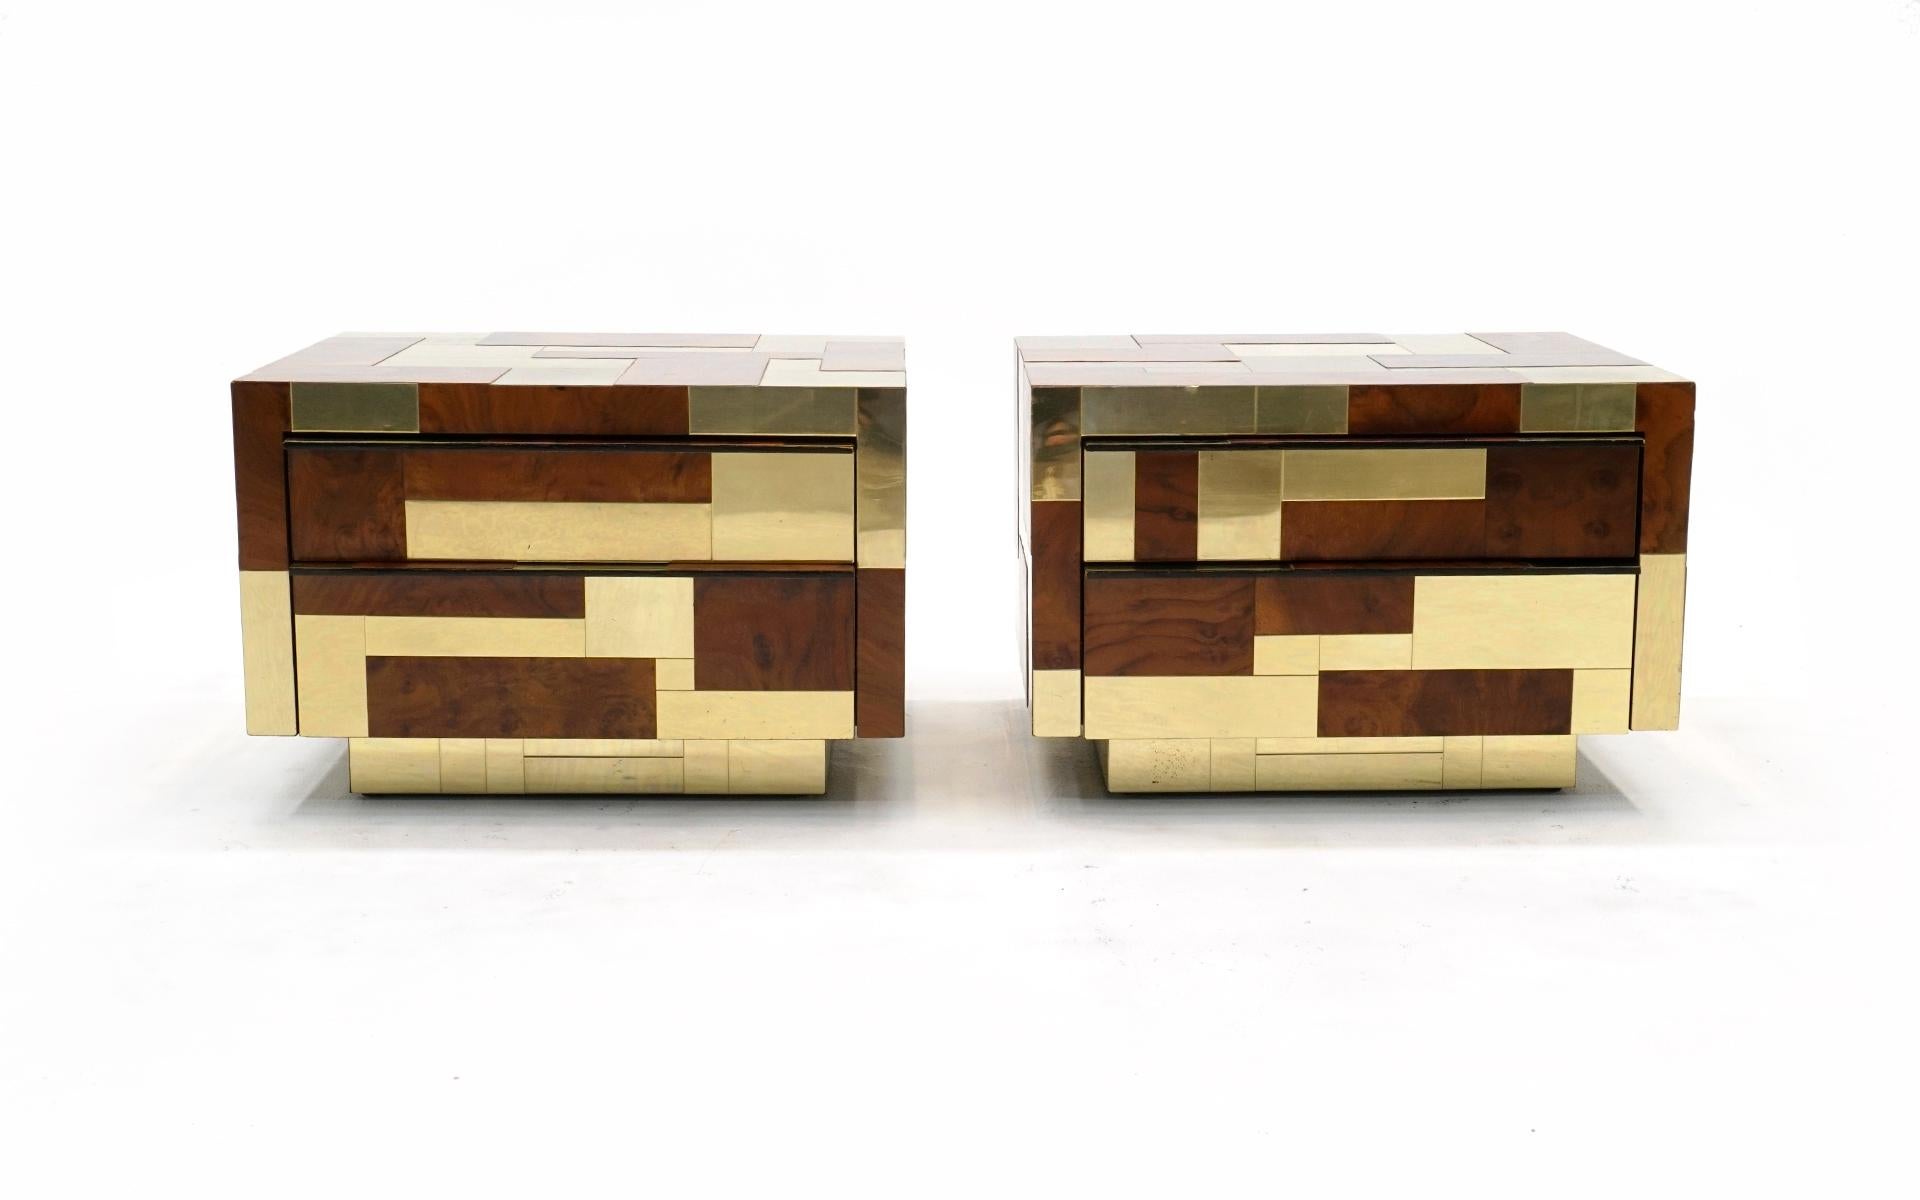 Rare and fine pair of burl and brass Cityscape night stands / nightstands designed by Paul Evans for Directional, 1970s. Both have two drawers that function perfectly. Clusters of light scratches to a few brass panels on the top. A few tiny spots on